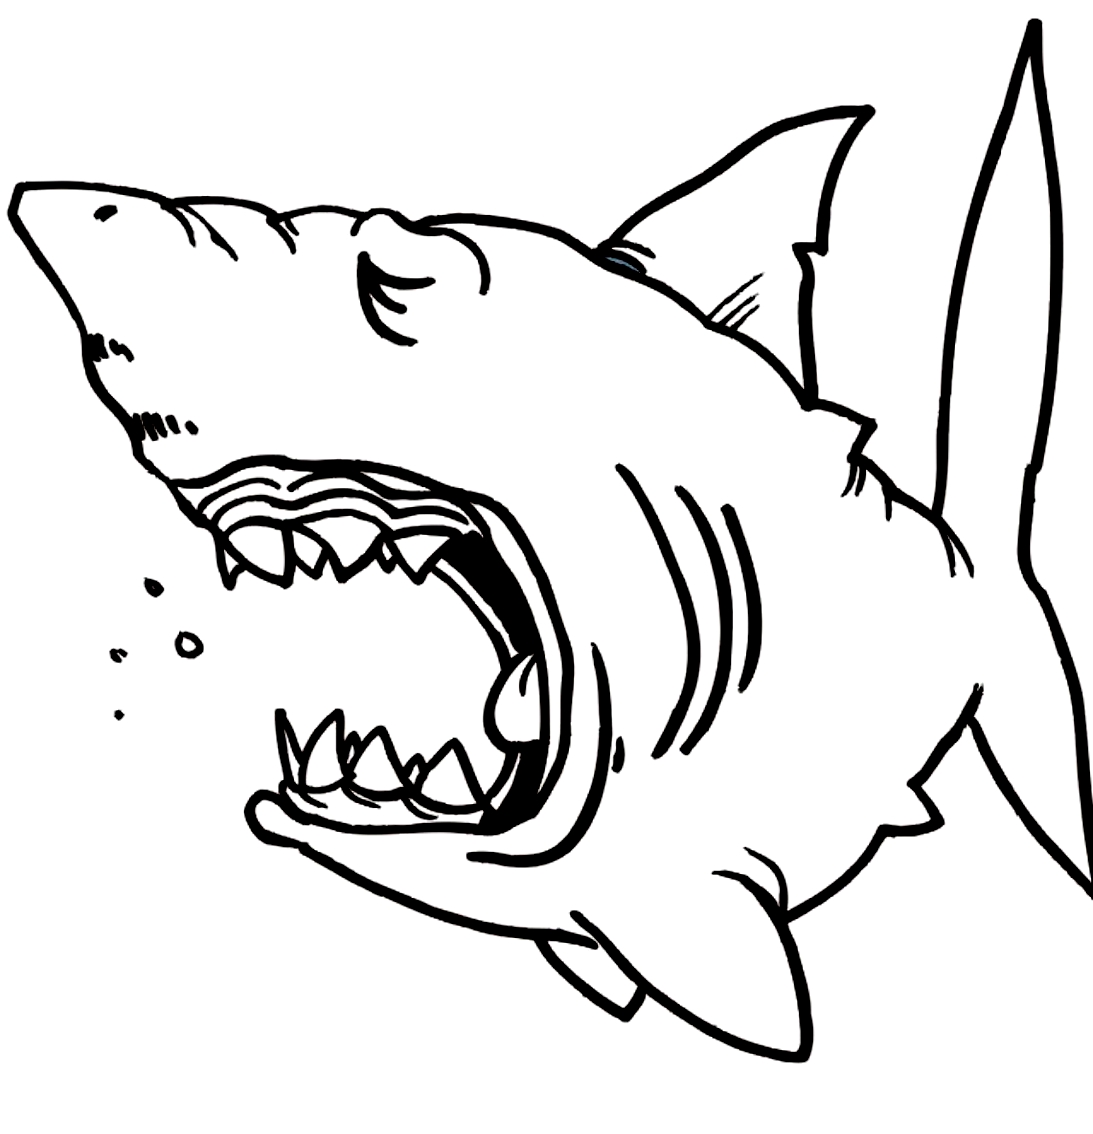 Drawing 10 of sharks to print and color